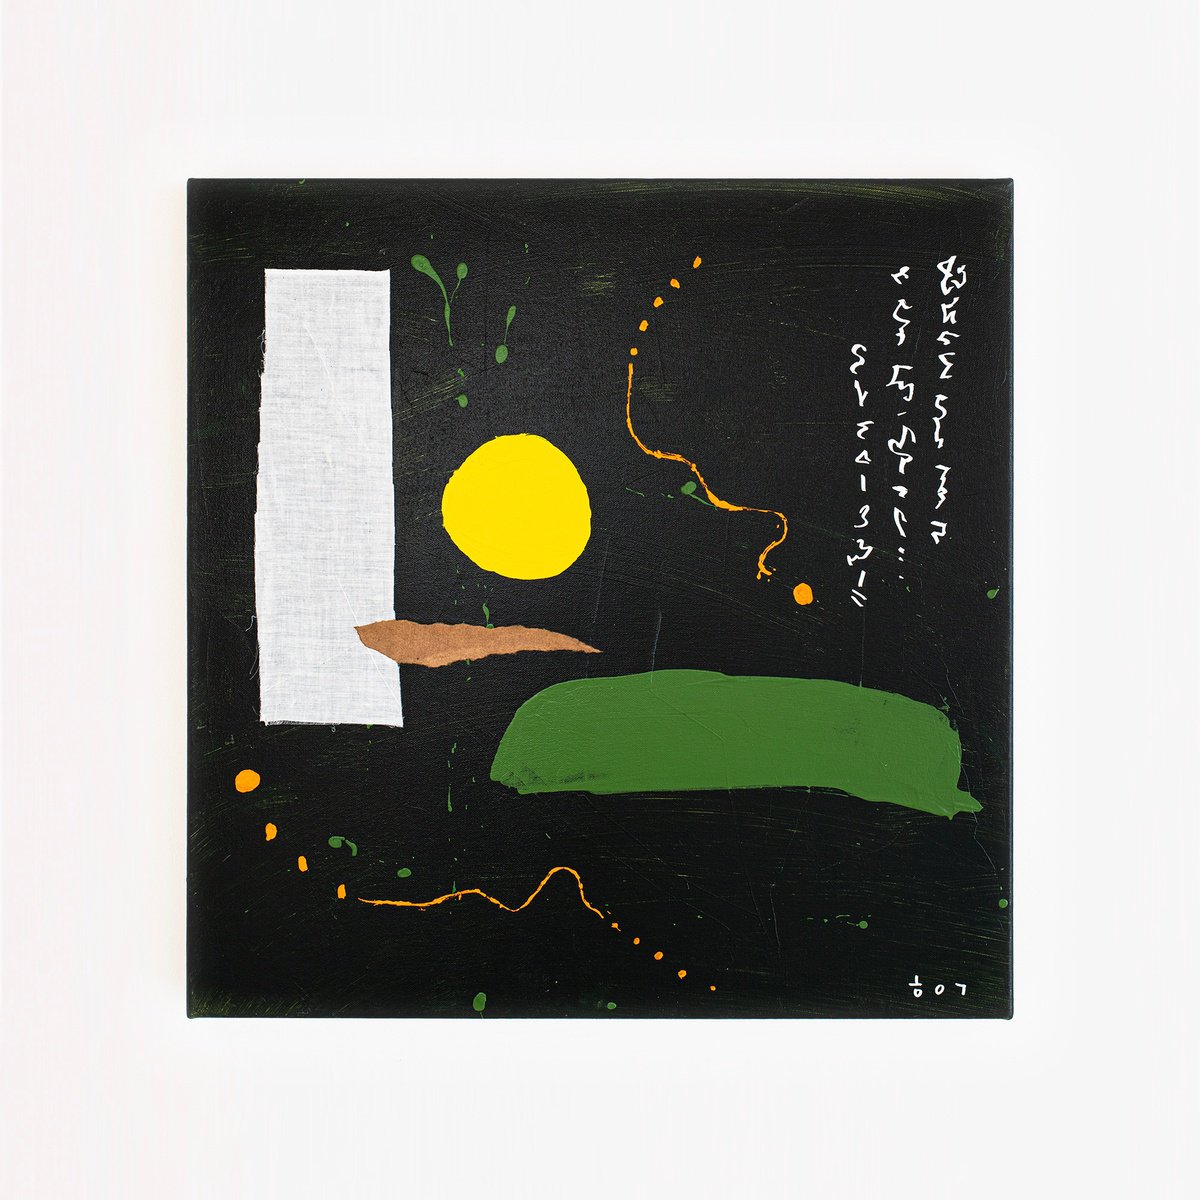 Poem started with a yellow dot (24x24 | 60x60 cm) by Hyunah Kim